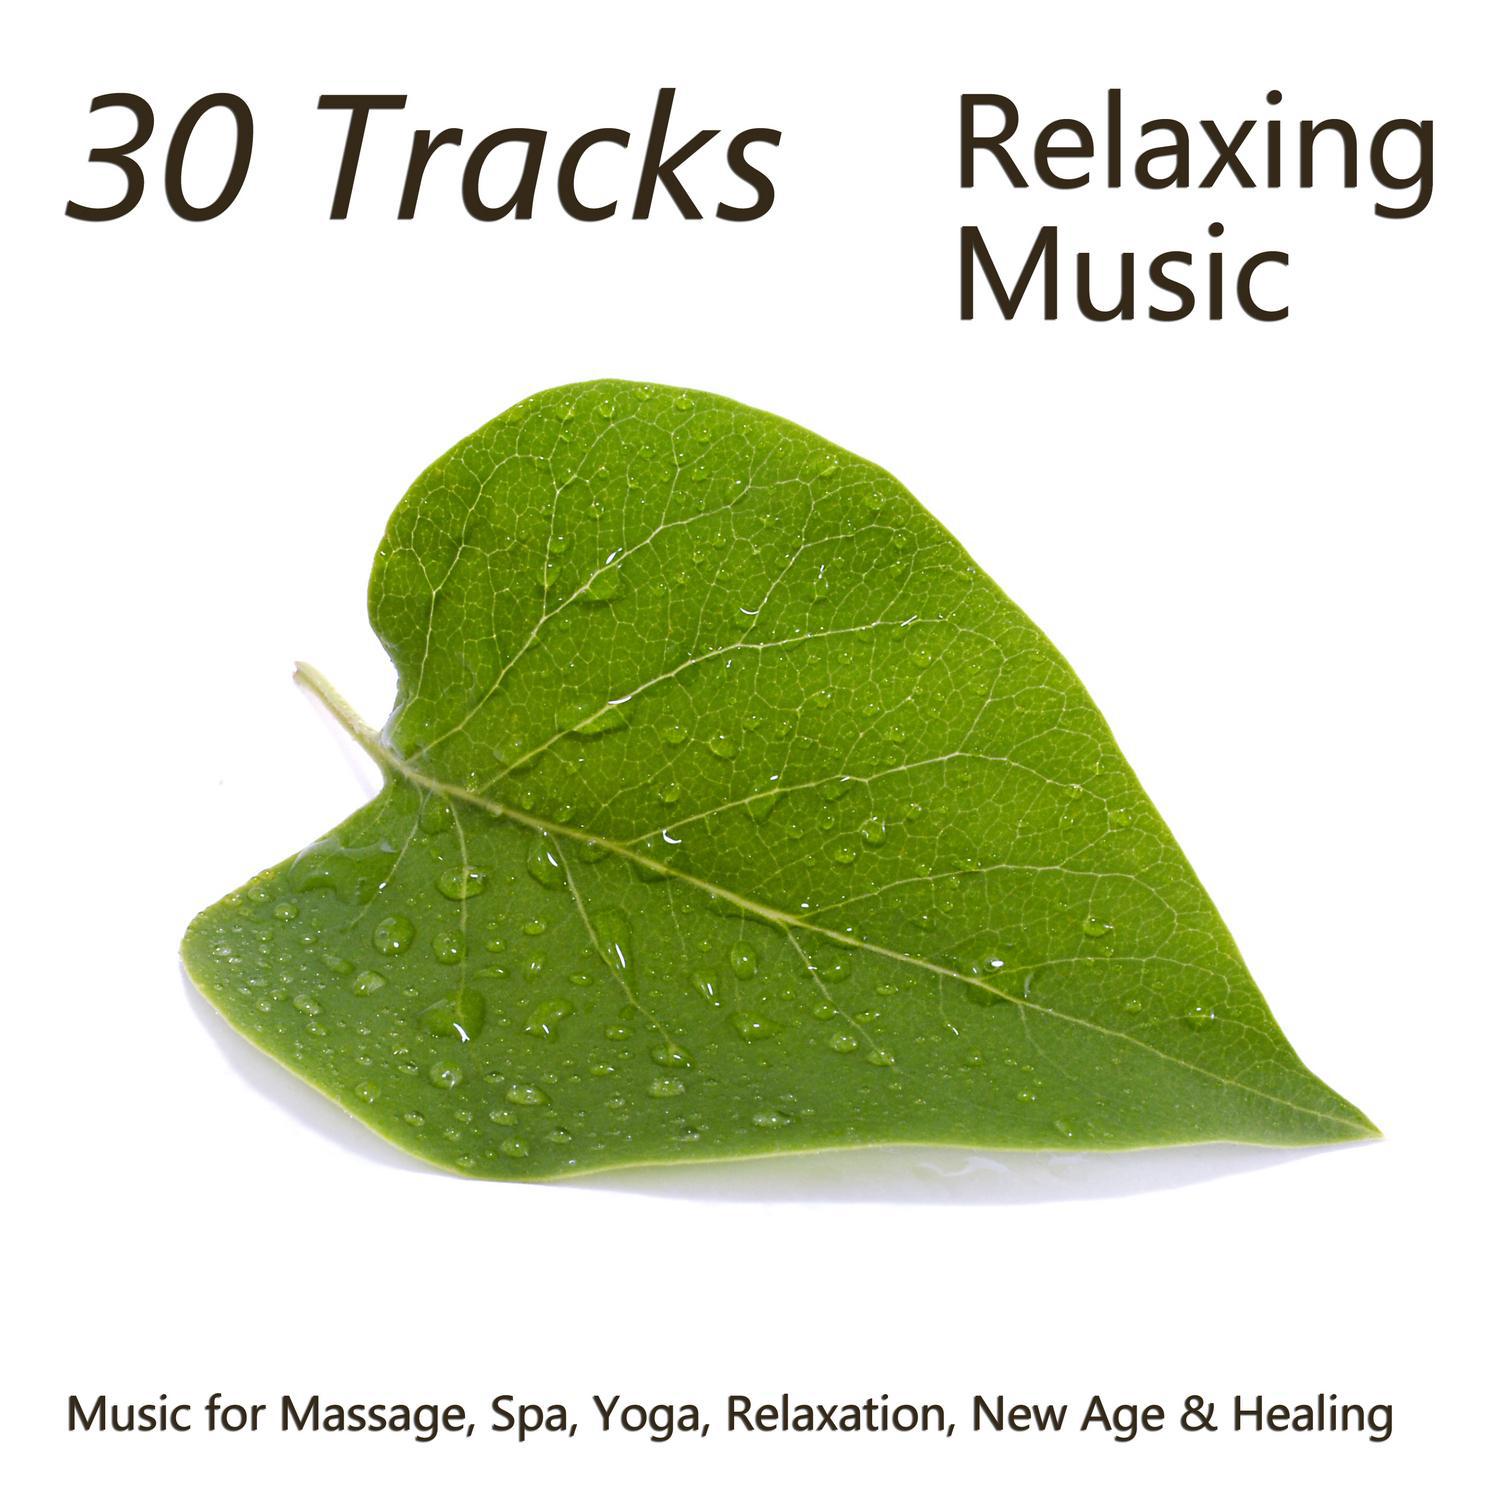 Beyond: Relaxing Music for Massage, Spa, Yoga, Meditation, New Age & Healing